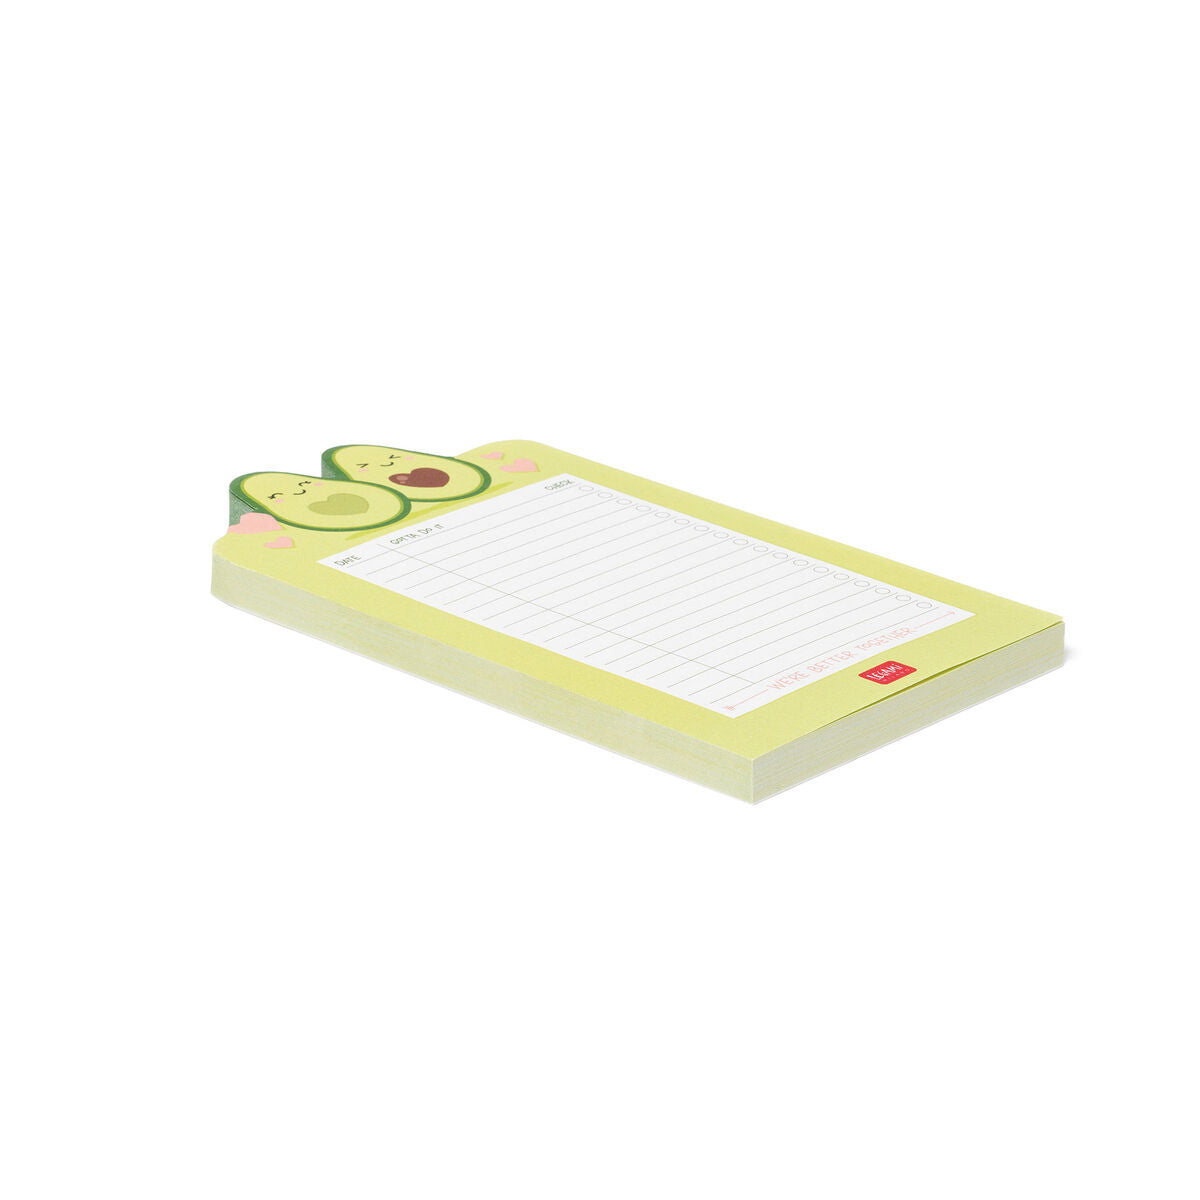 Stationery | Legami Paper Thoughts Notepad Avocado by Weirs of Baggot Street